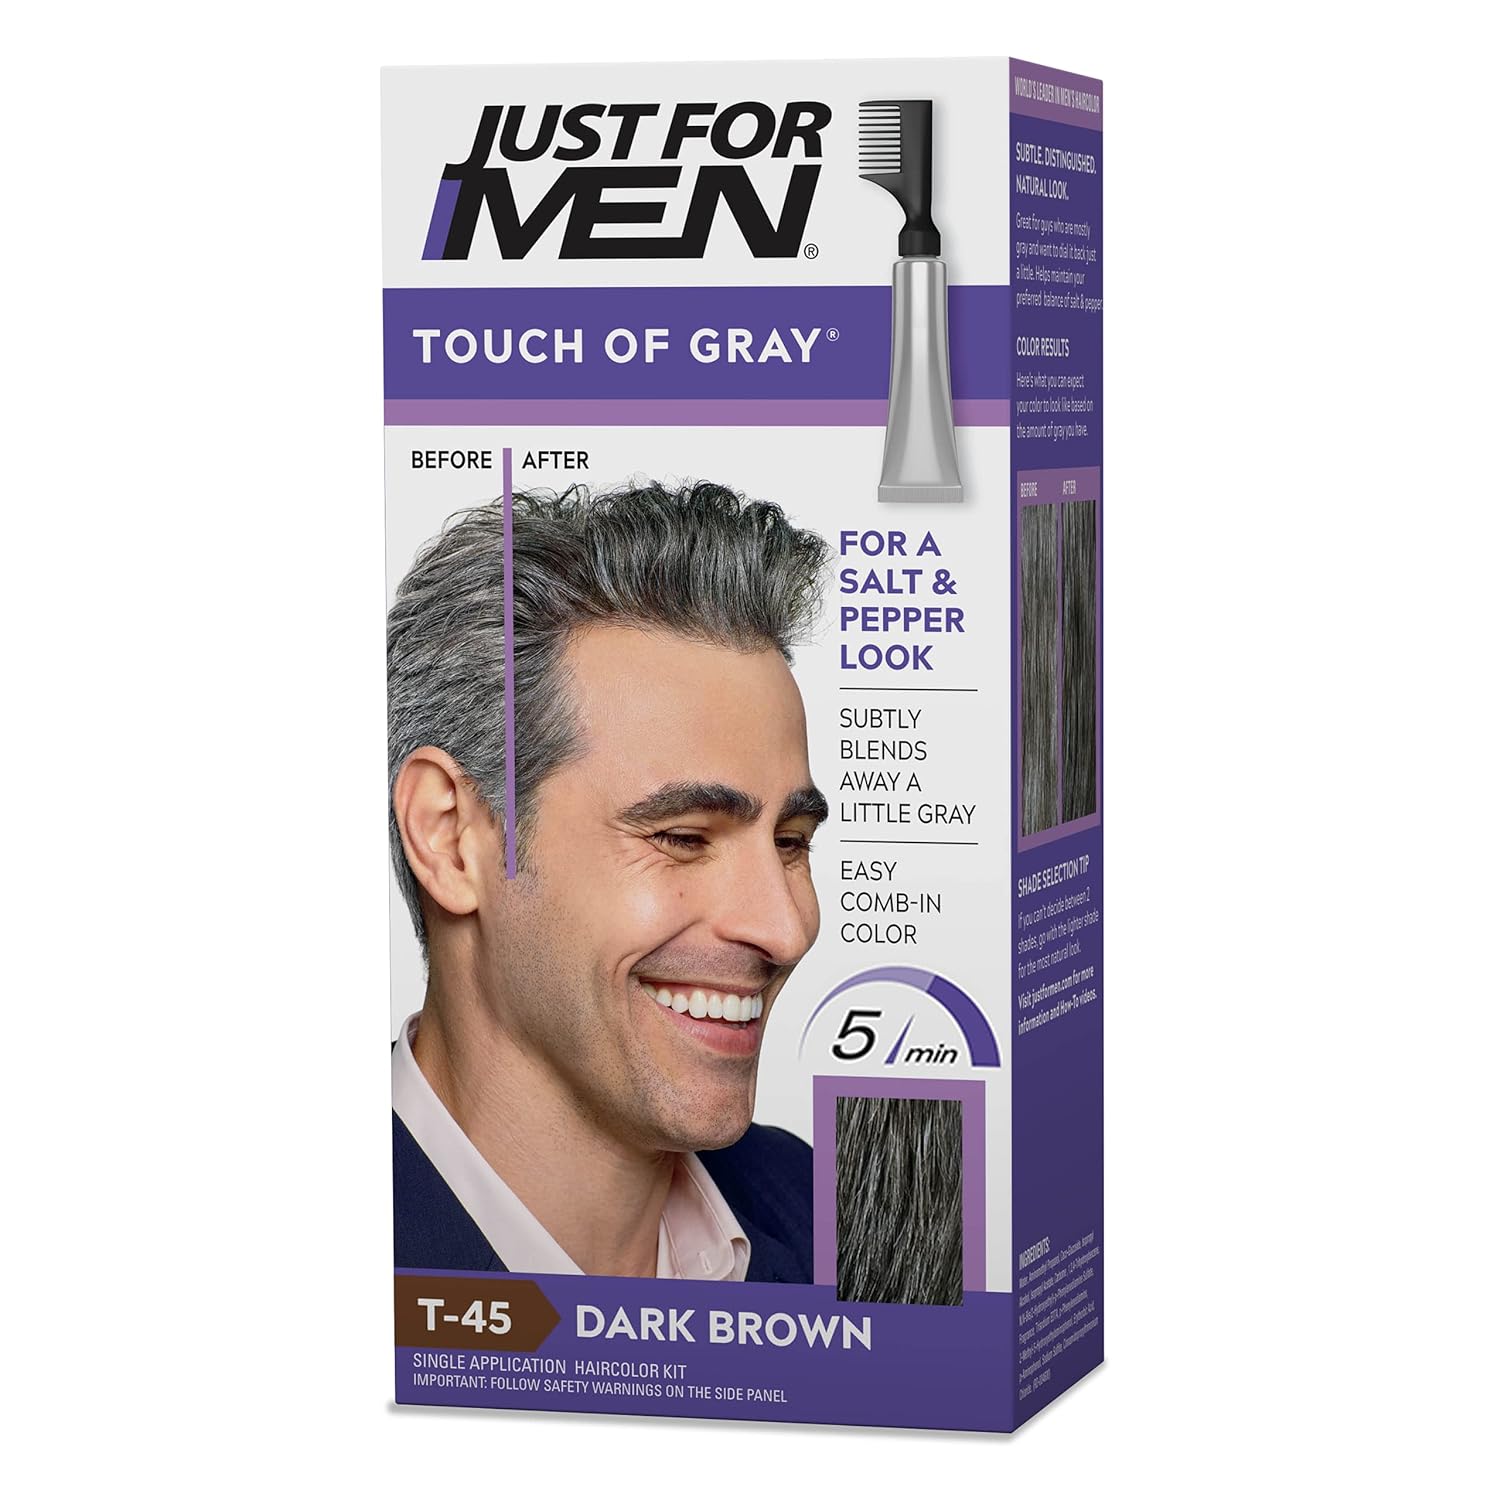 Just For Men Dark Brown Hair Color Touch of Gray, T-45 Dark Brown